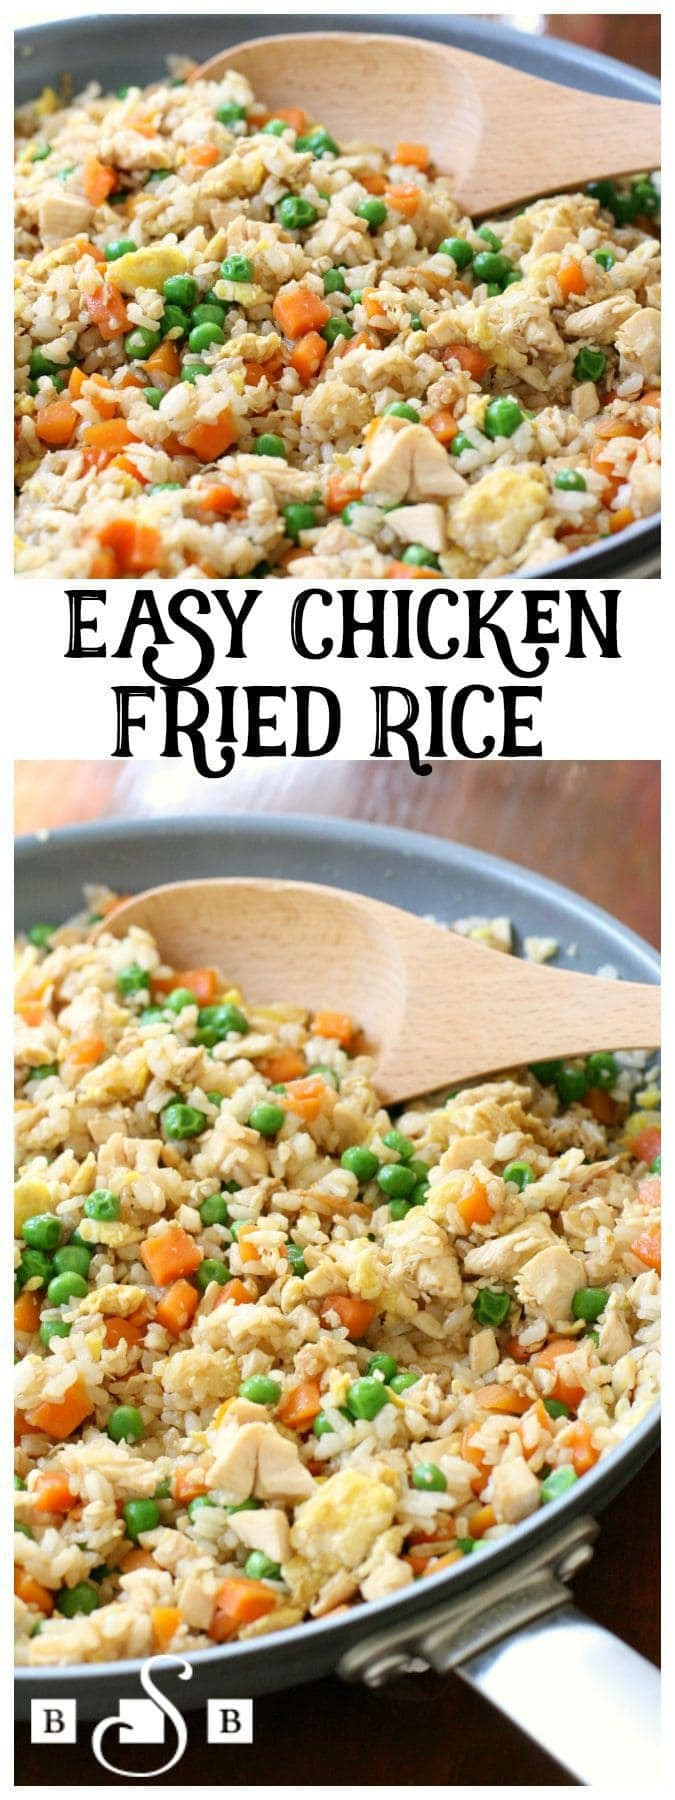 Chicken Fried Rice Recipes Easy
 EASY CHICKEN FRIED RICE RECIPE Butter with a Side of Bread